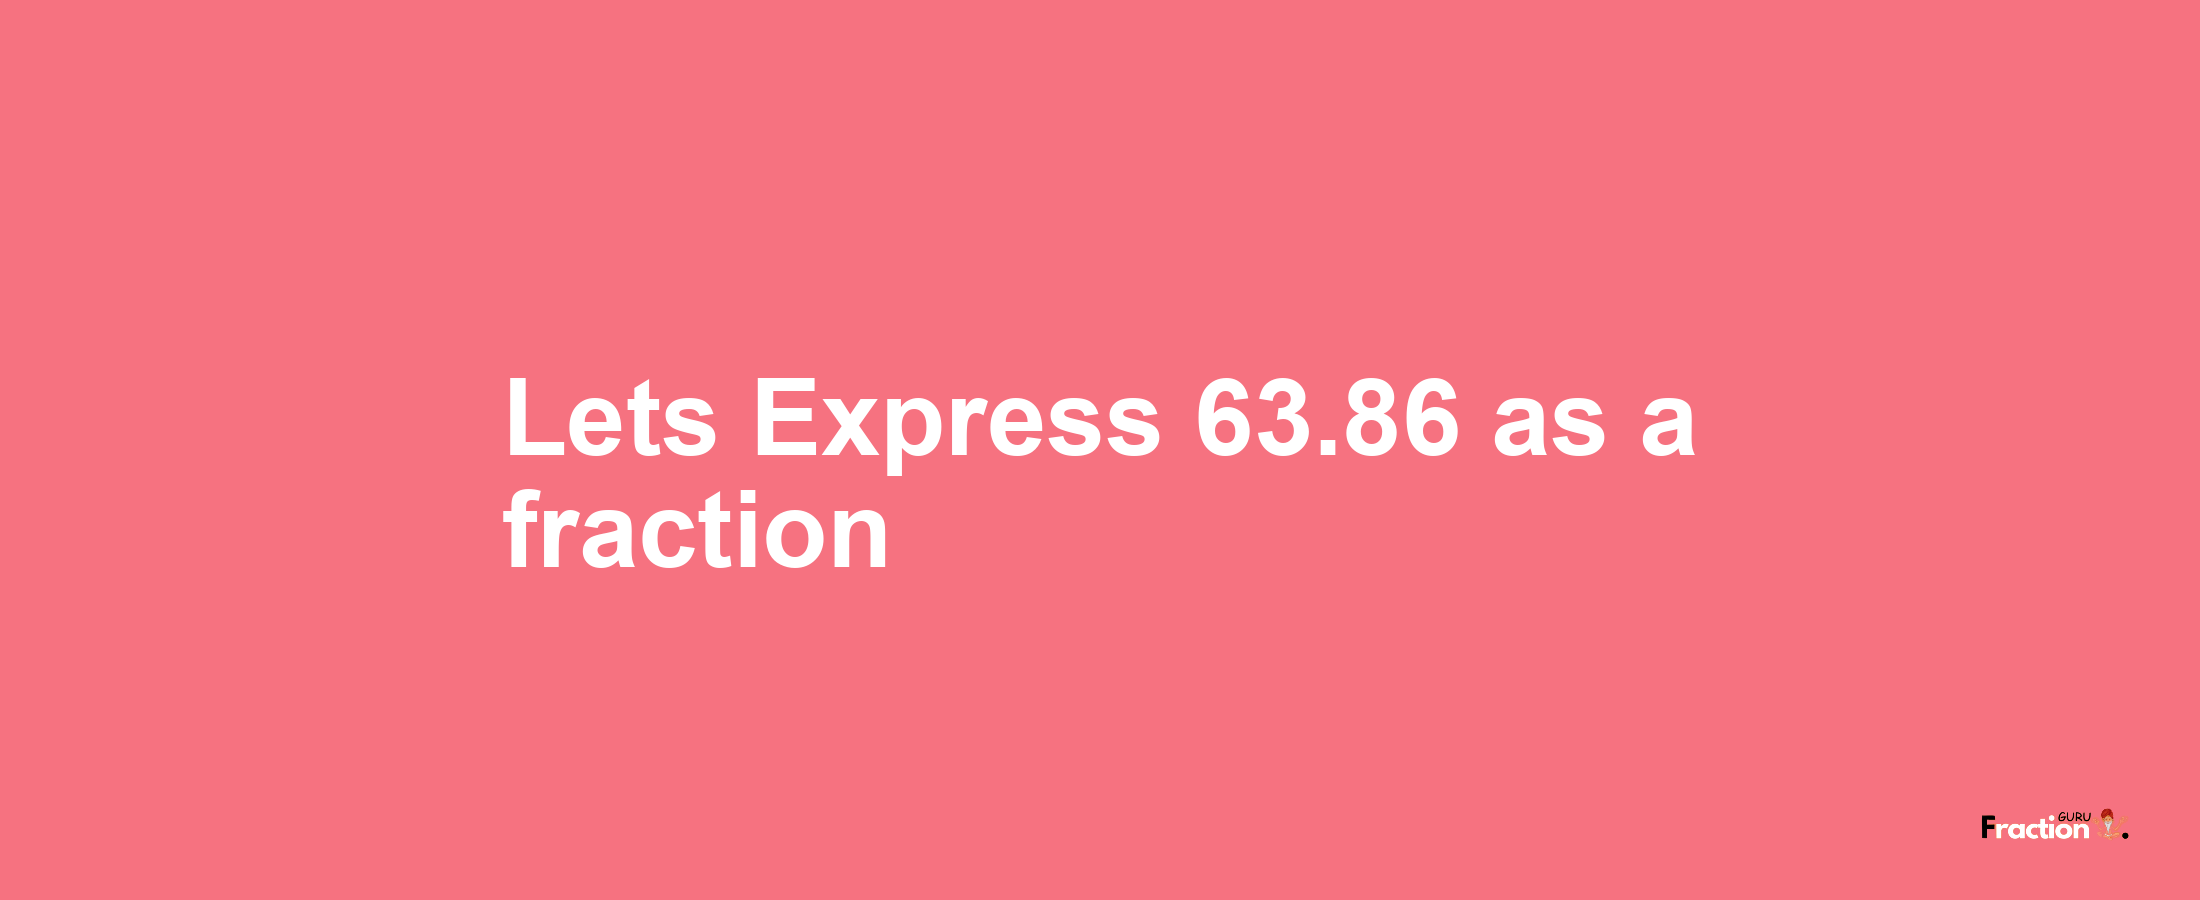 Lets Express 63.86 as afraction